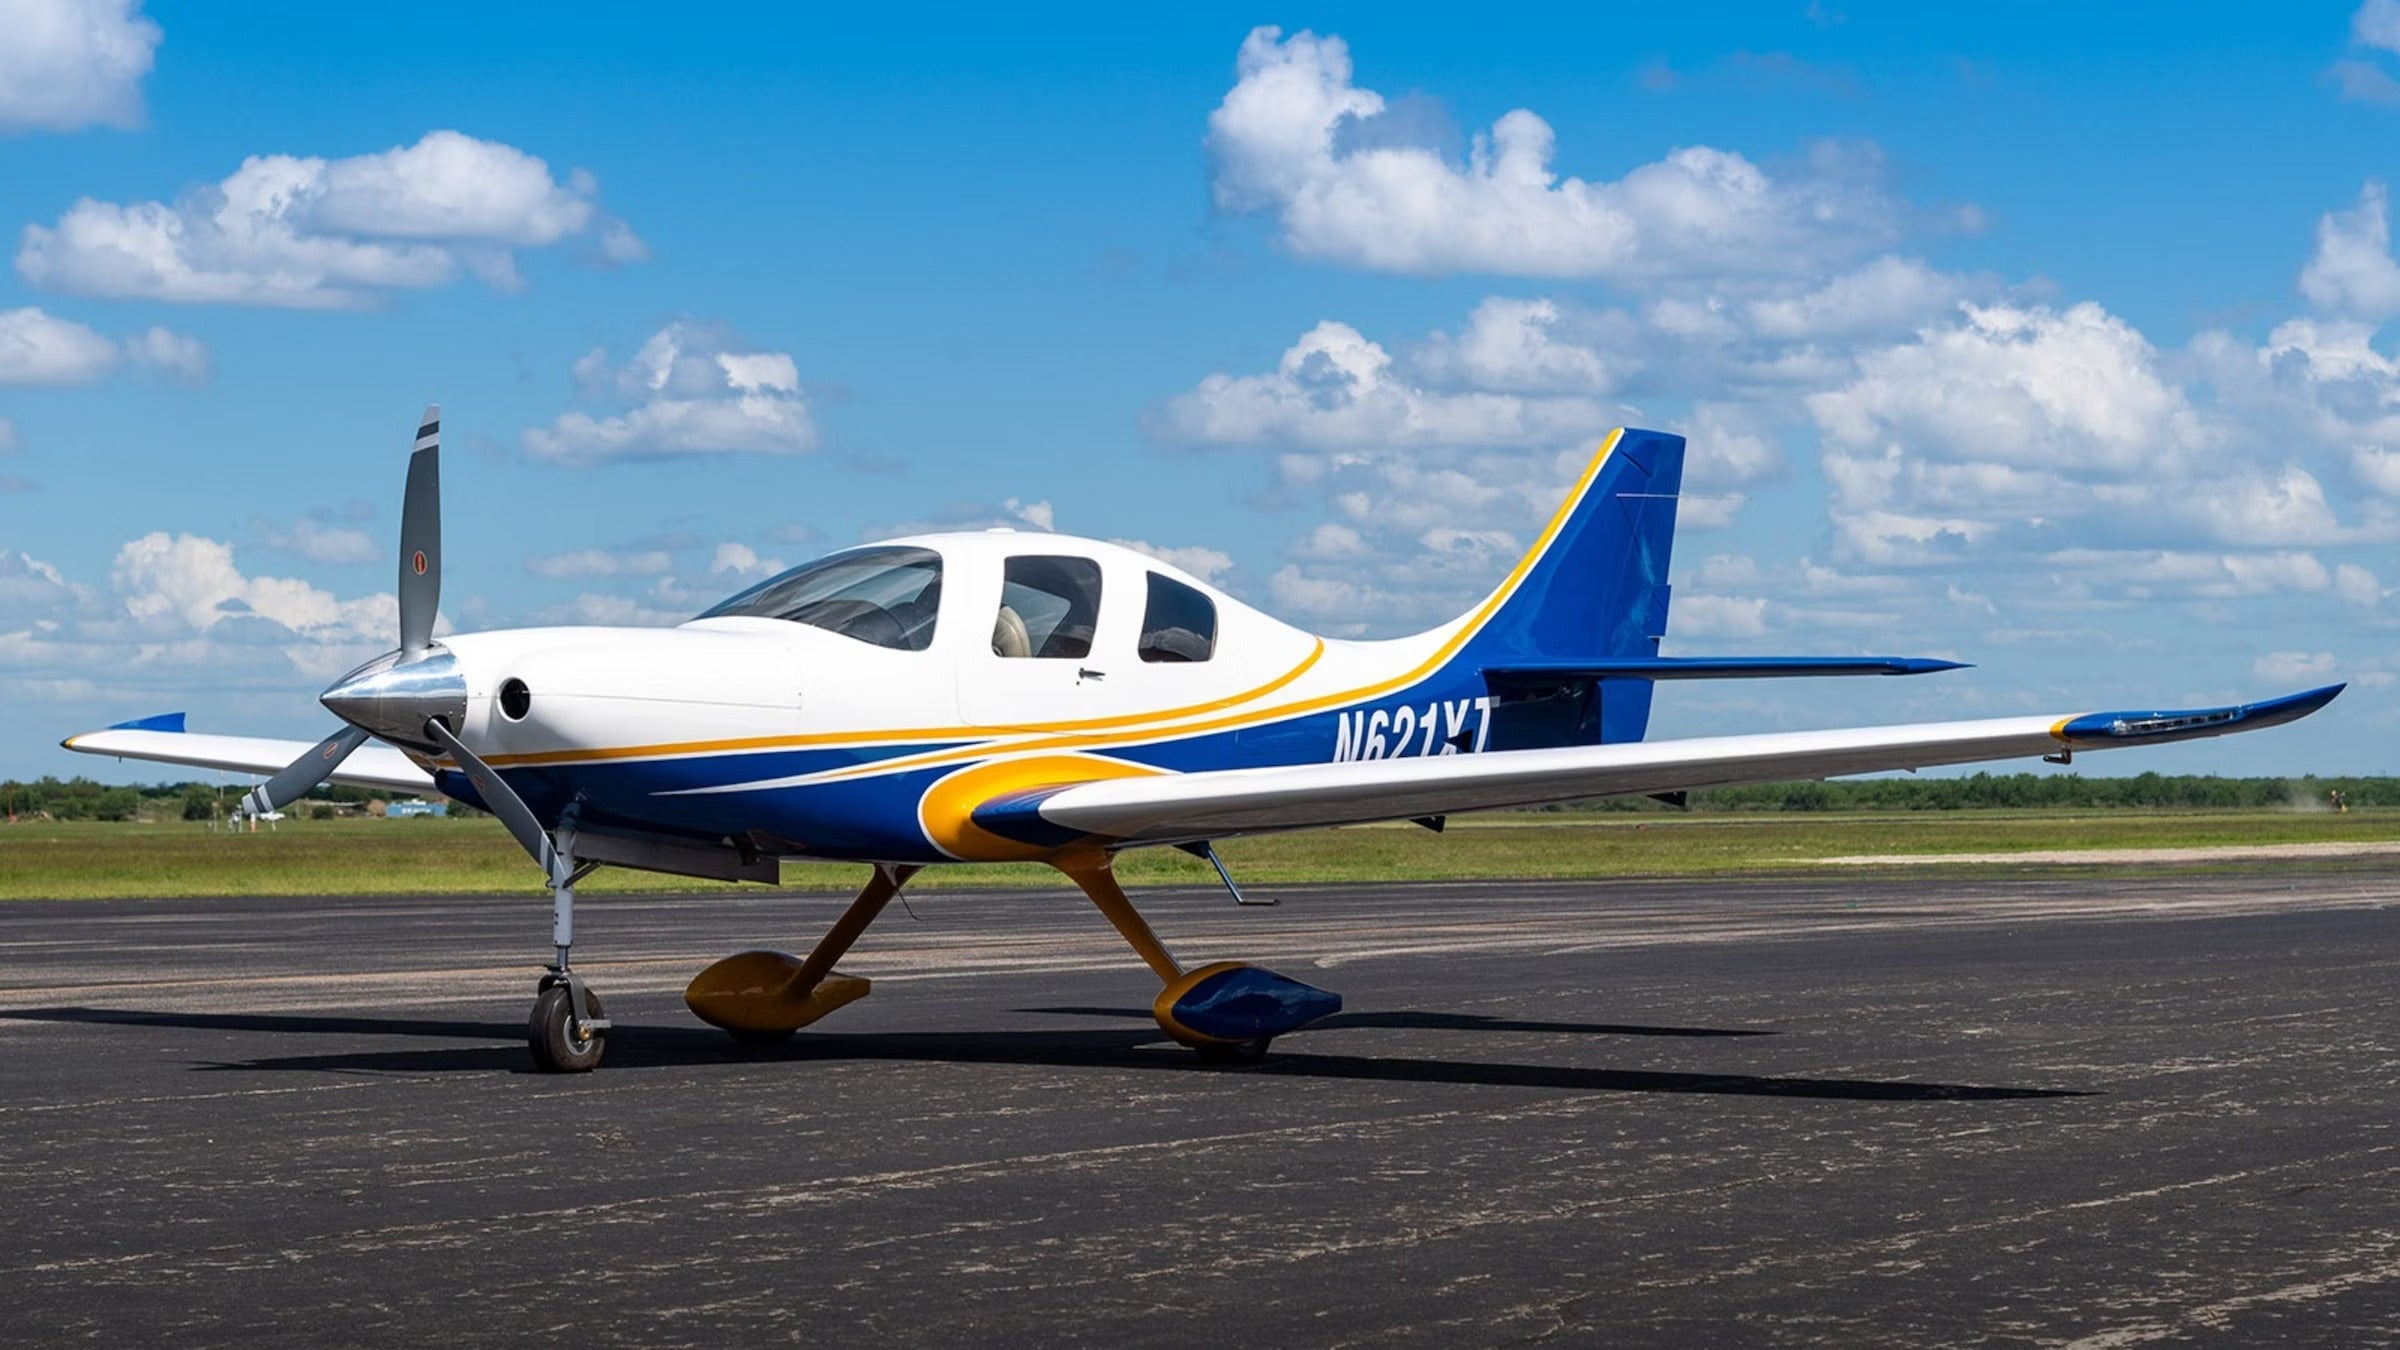 This 2004 Lancair ES Is an ‘AircraftForSale’ Top Pick for Kit-Built Enthusiasts